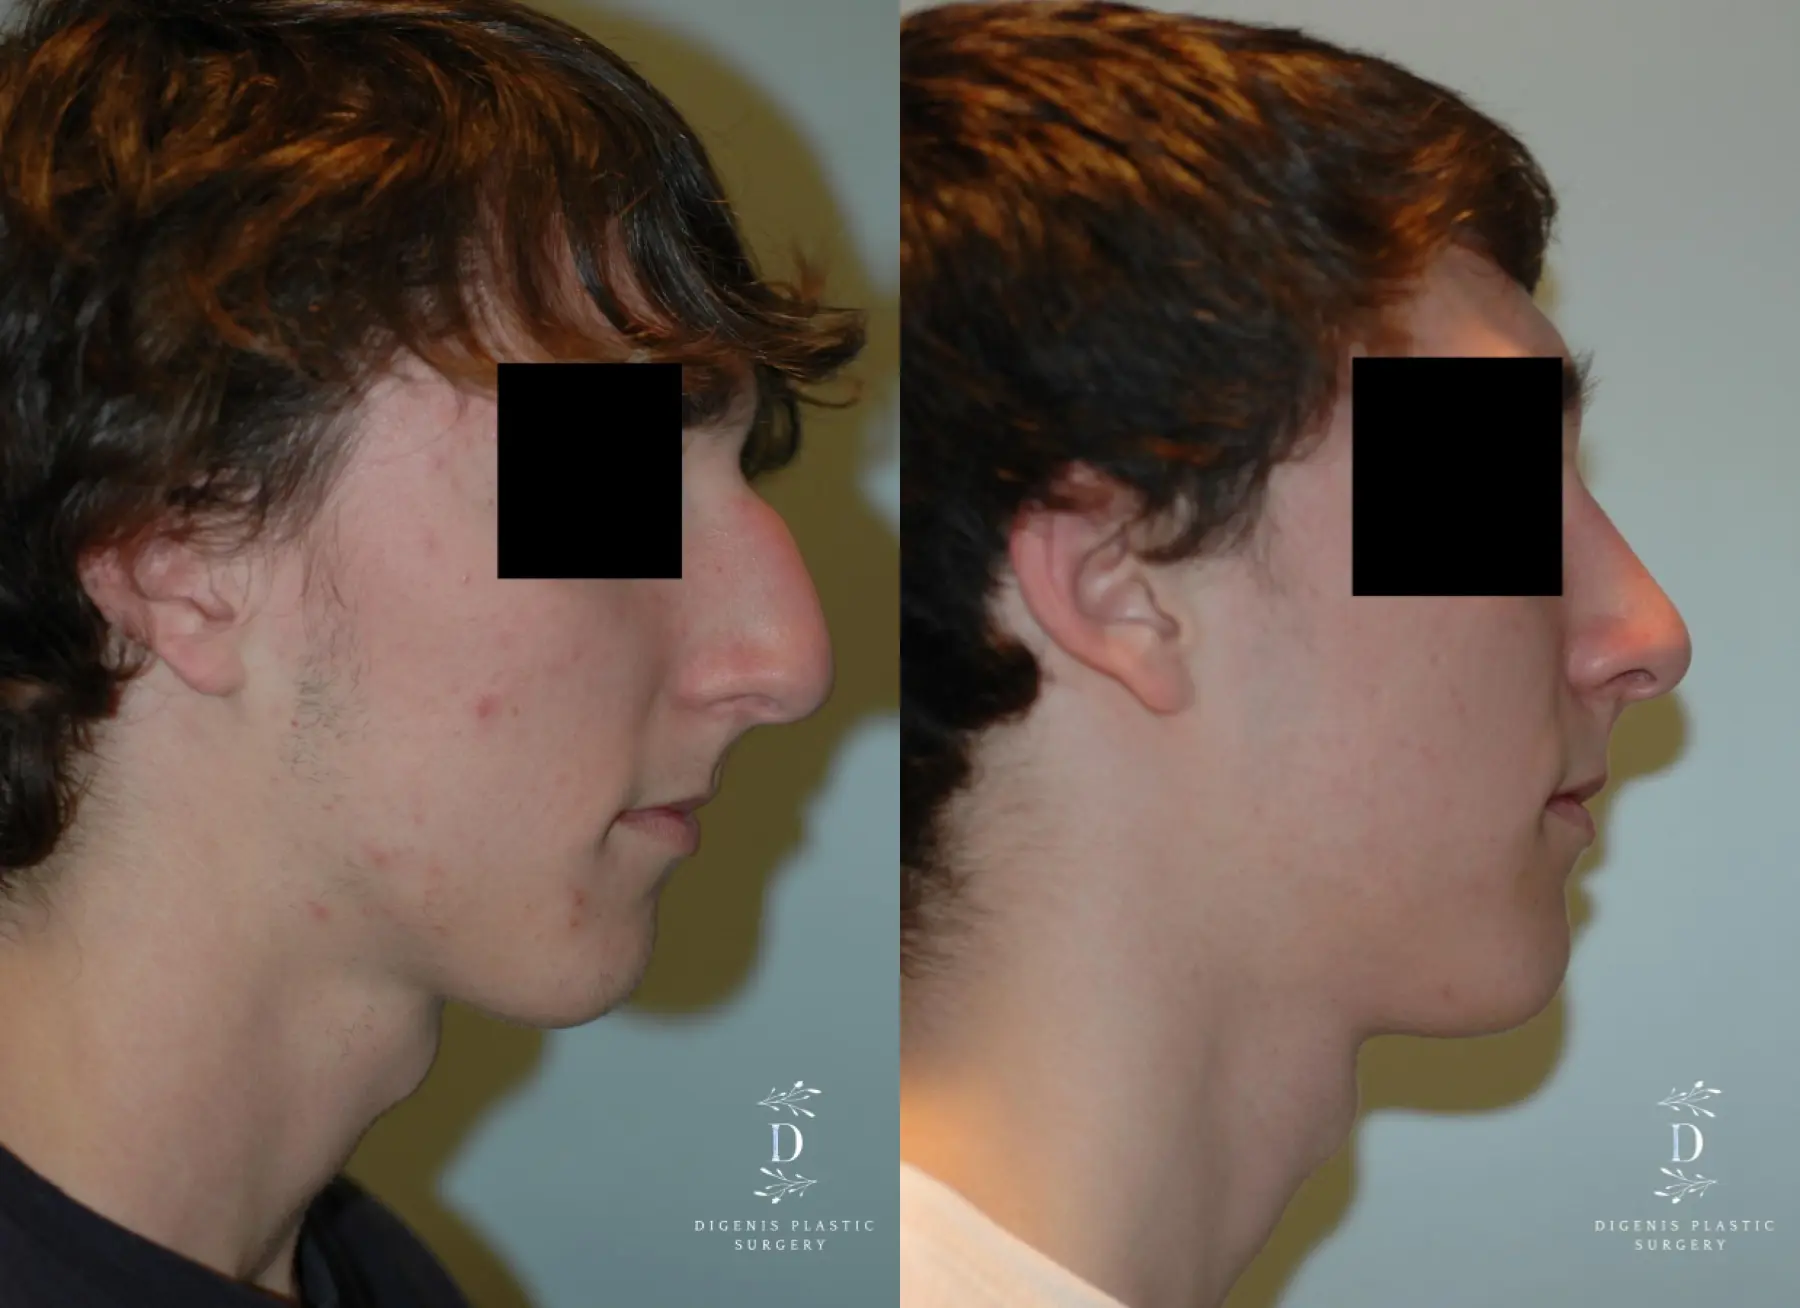 Rhinoplasty: Patient 9 - Before and After 3